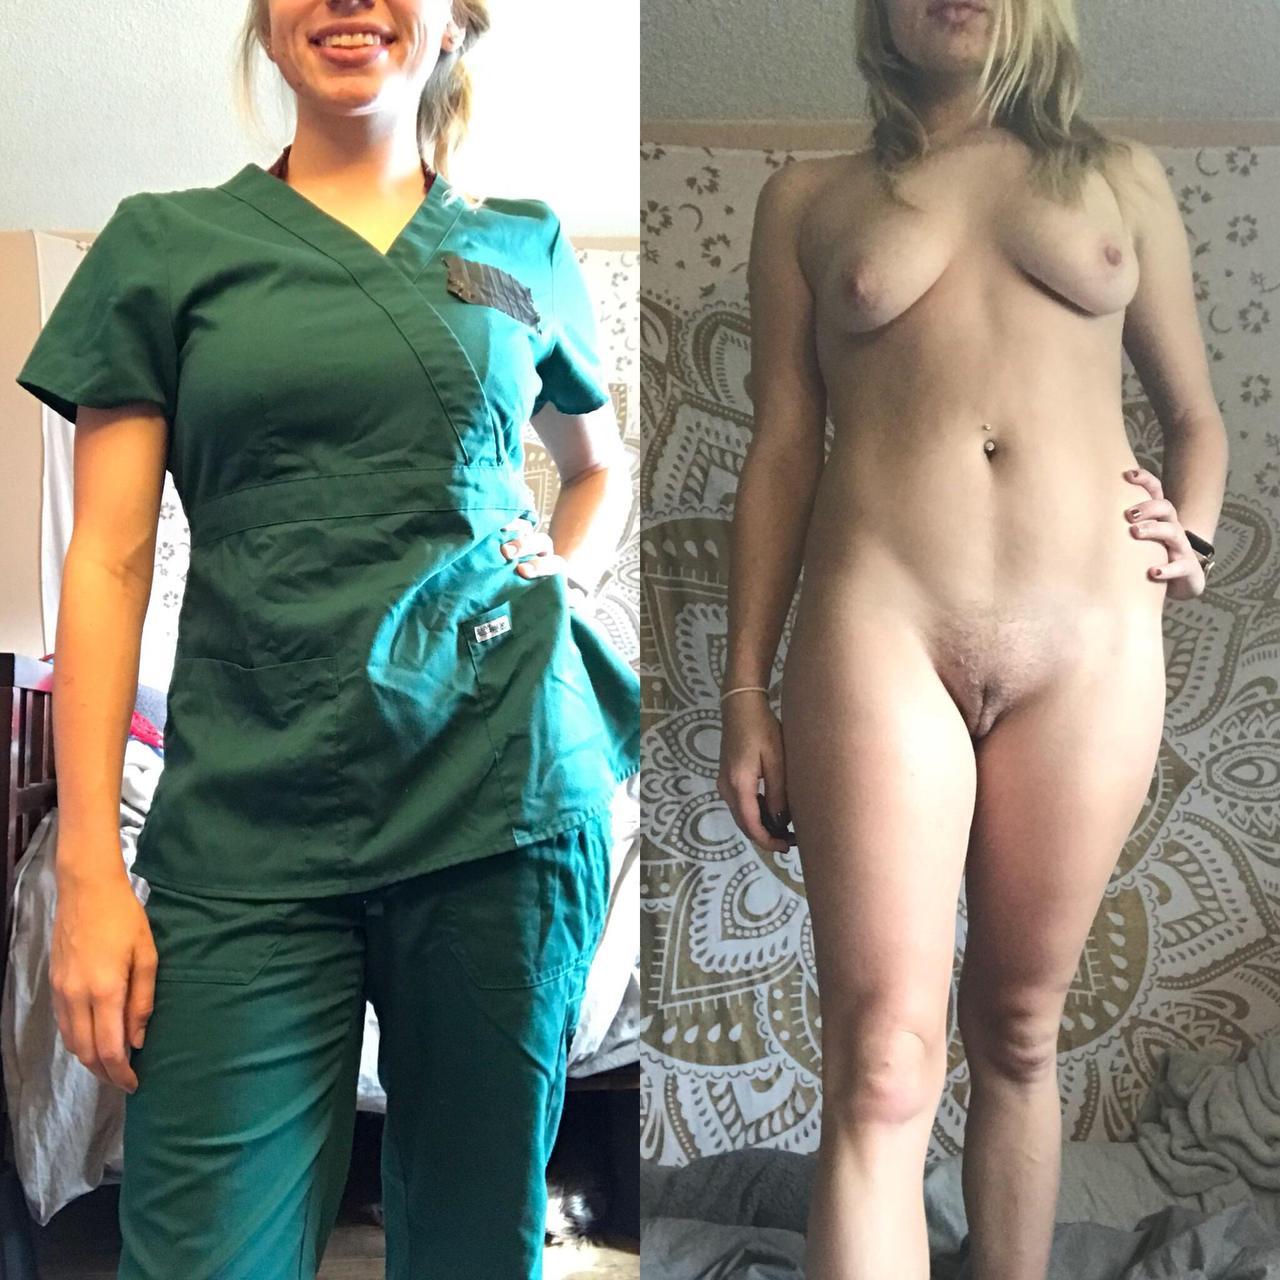 get-wild-at-work-for-me-baby:  [f] scrubs 💋 // All photo credit and gratitude